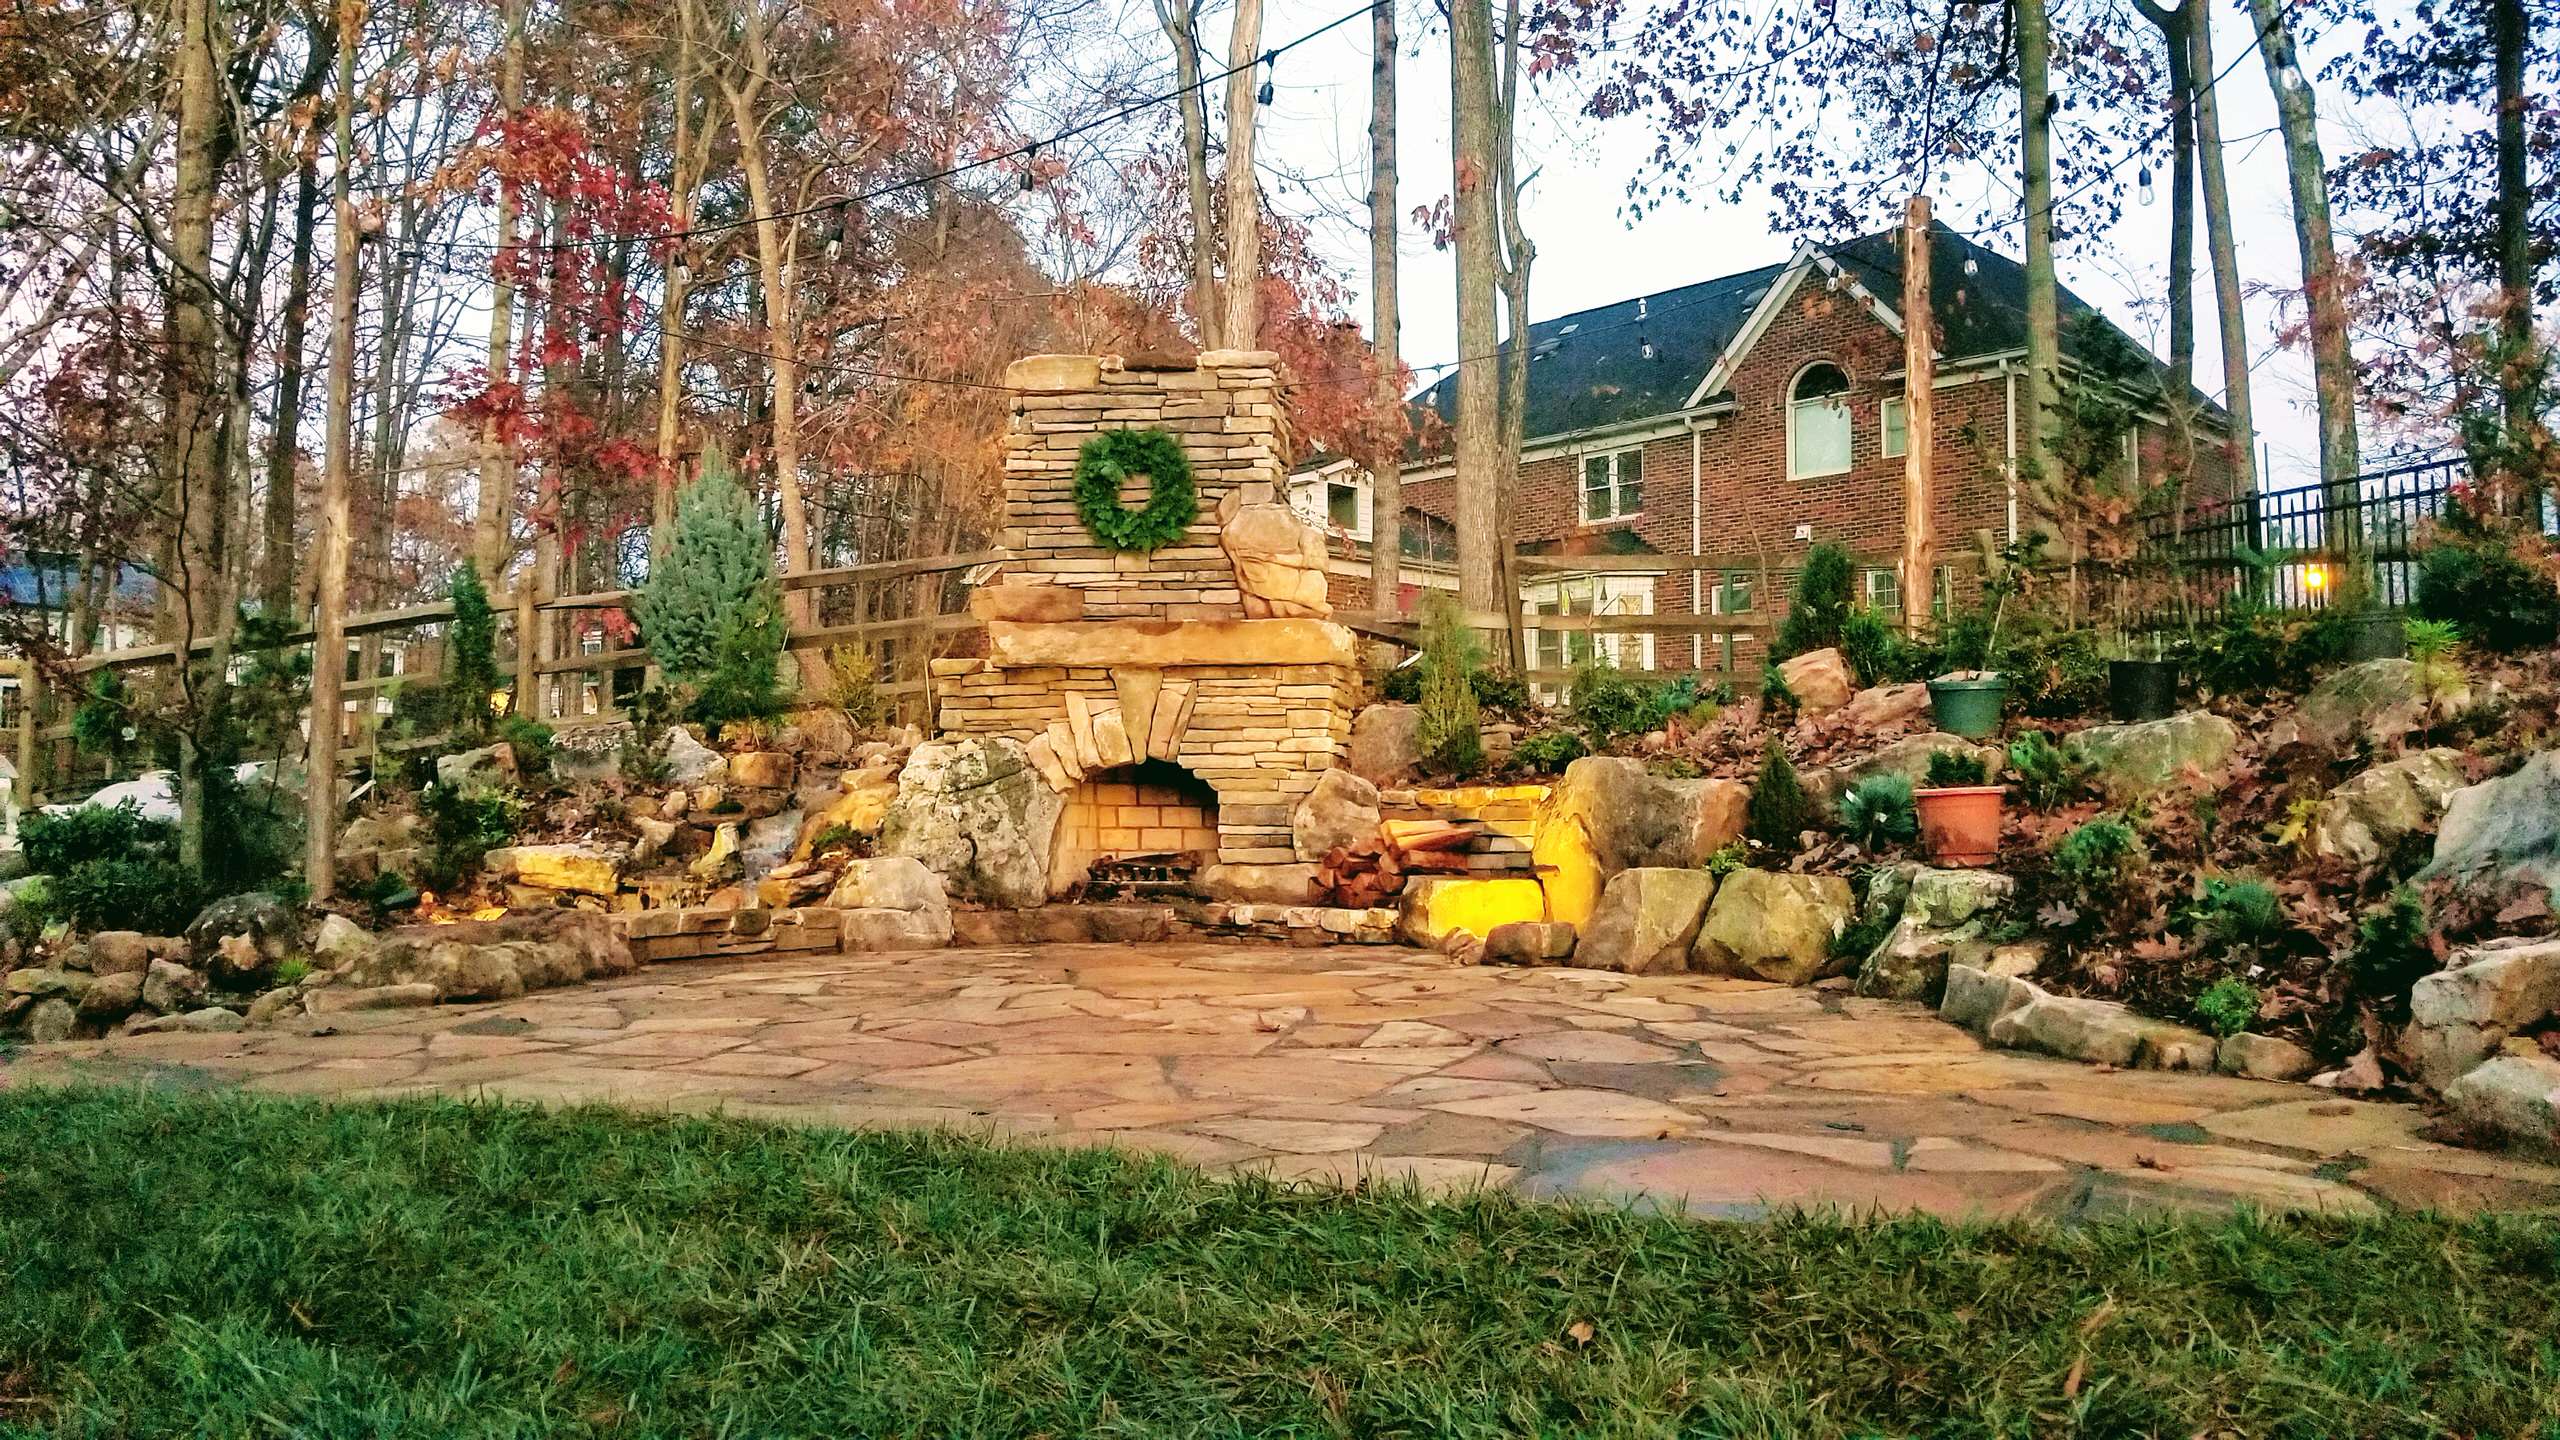 Outdoor living fireplace